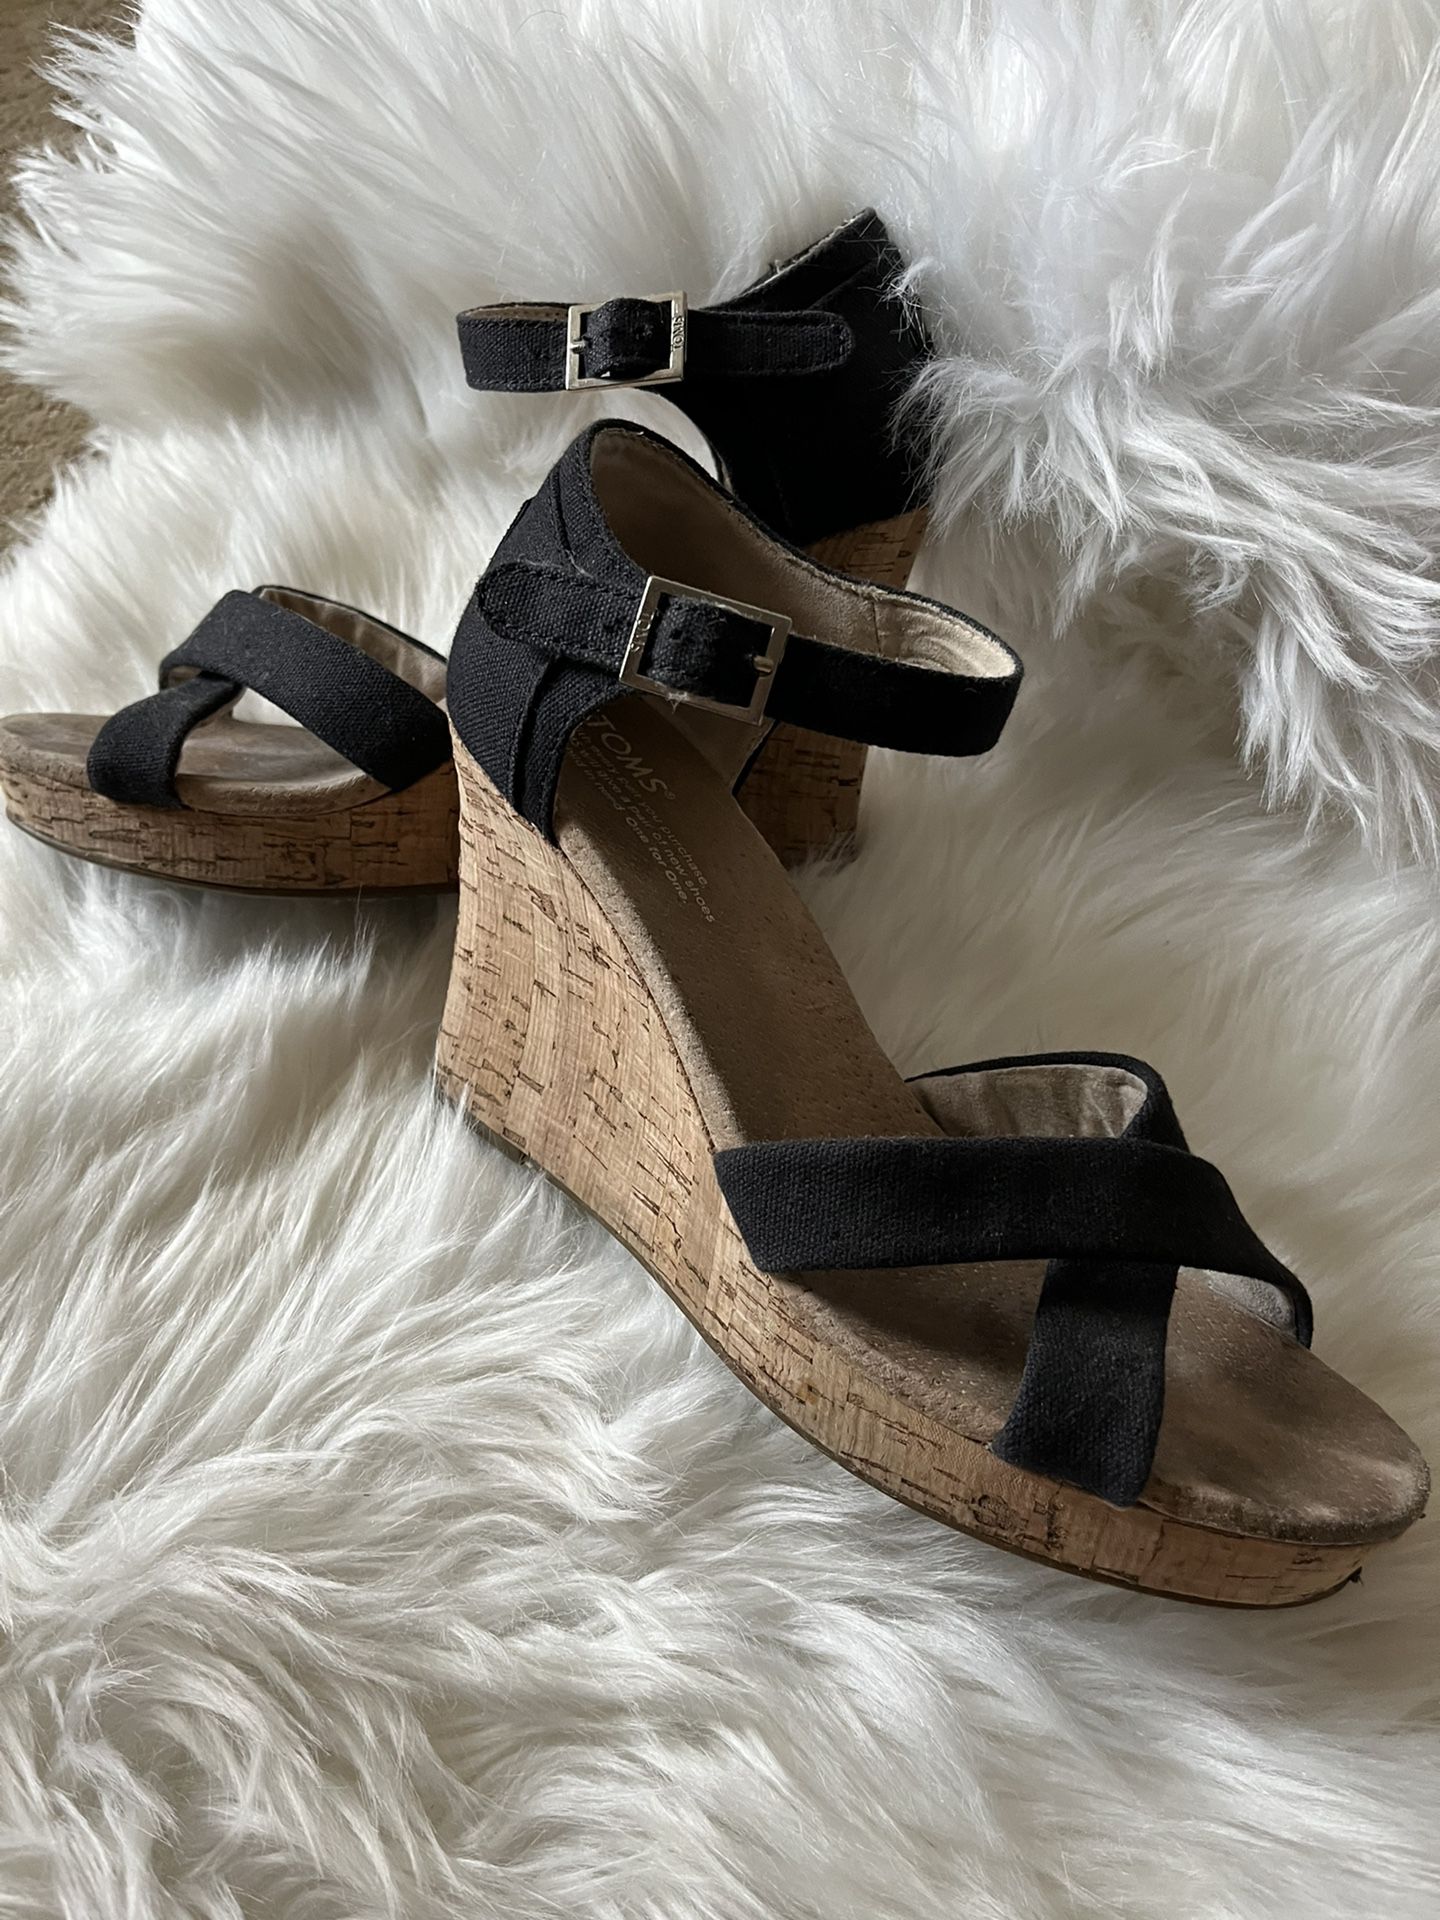 Toms Cork Wedges 8.5 W Black Strappy  Great Condition 